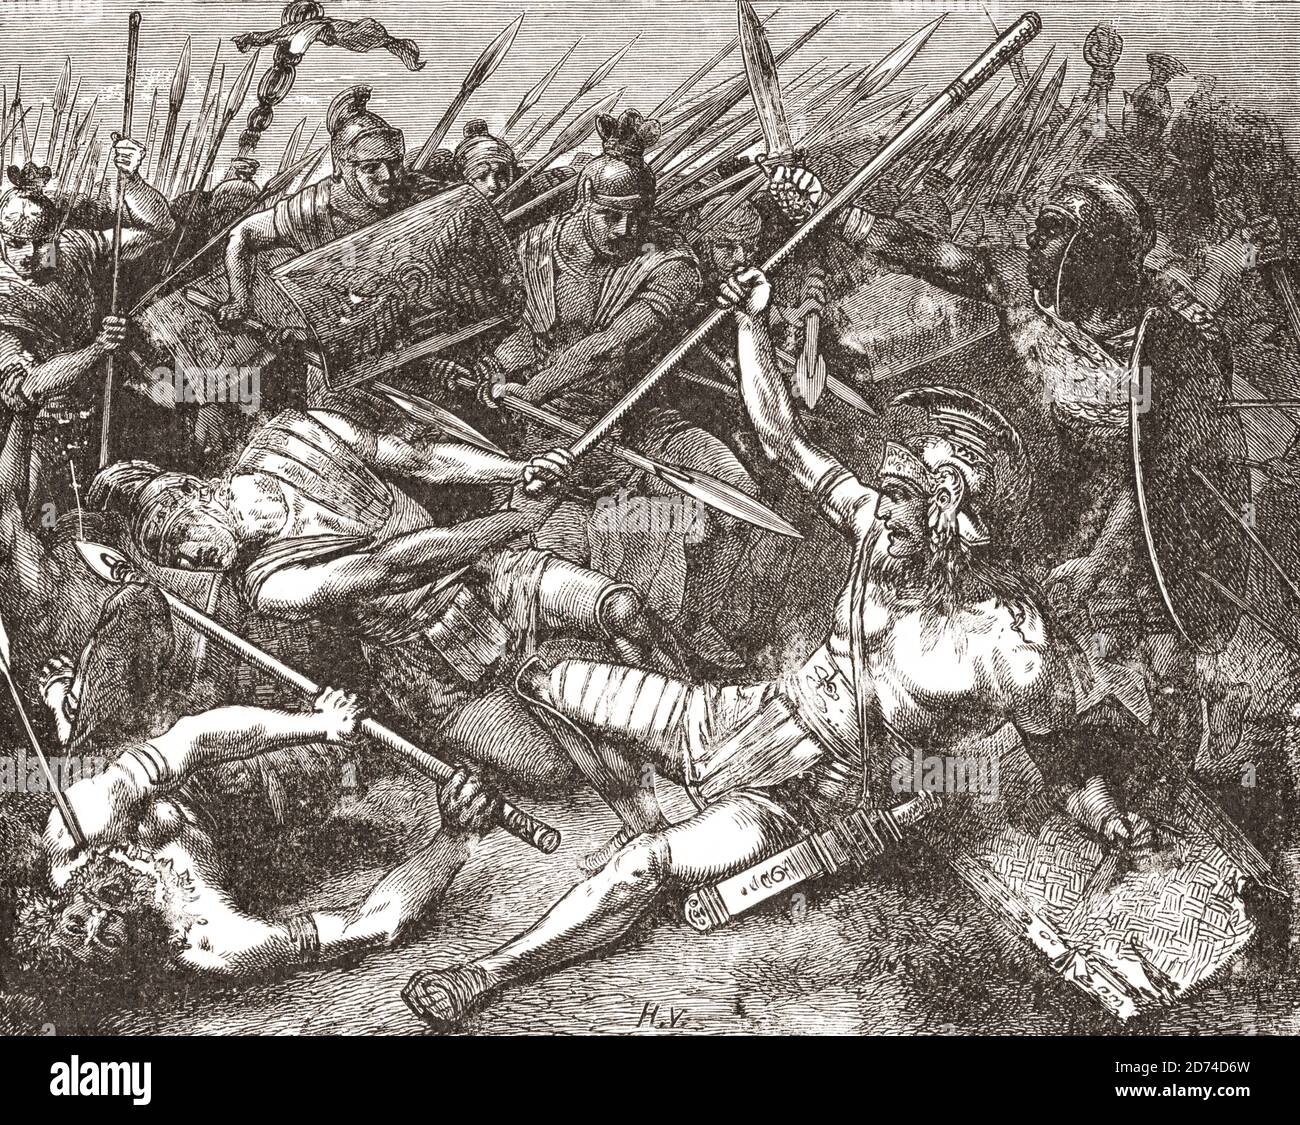 The death of Spartacus in 71 BC during the Battle of the Silarius River near Senerchia in the present day Province of Avellino, Campania, Italy.   His revolt ended after his force was defeated by the army of Marcus Licinius Crassus.  After a work by German artist Hermann Vogel. Stock Photo